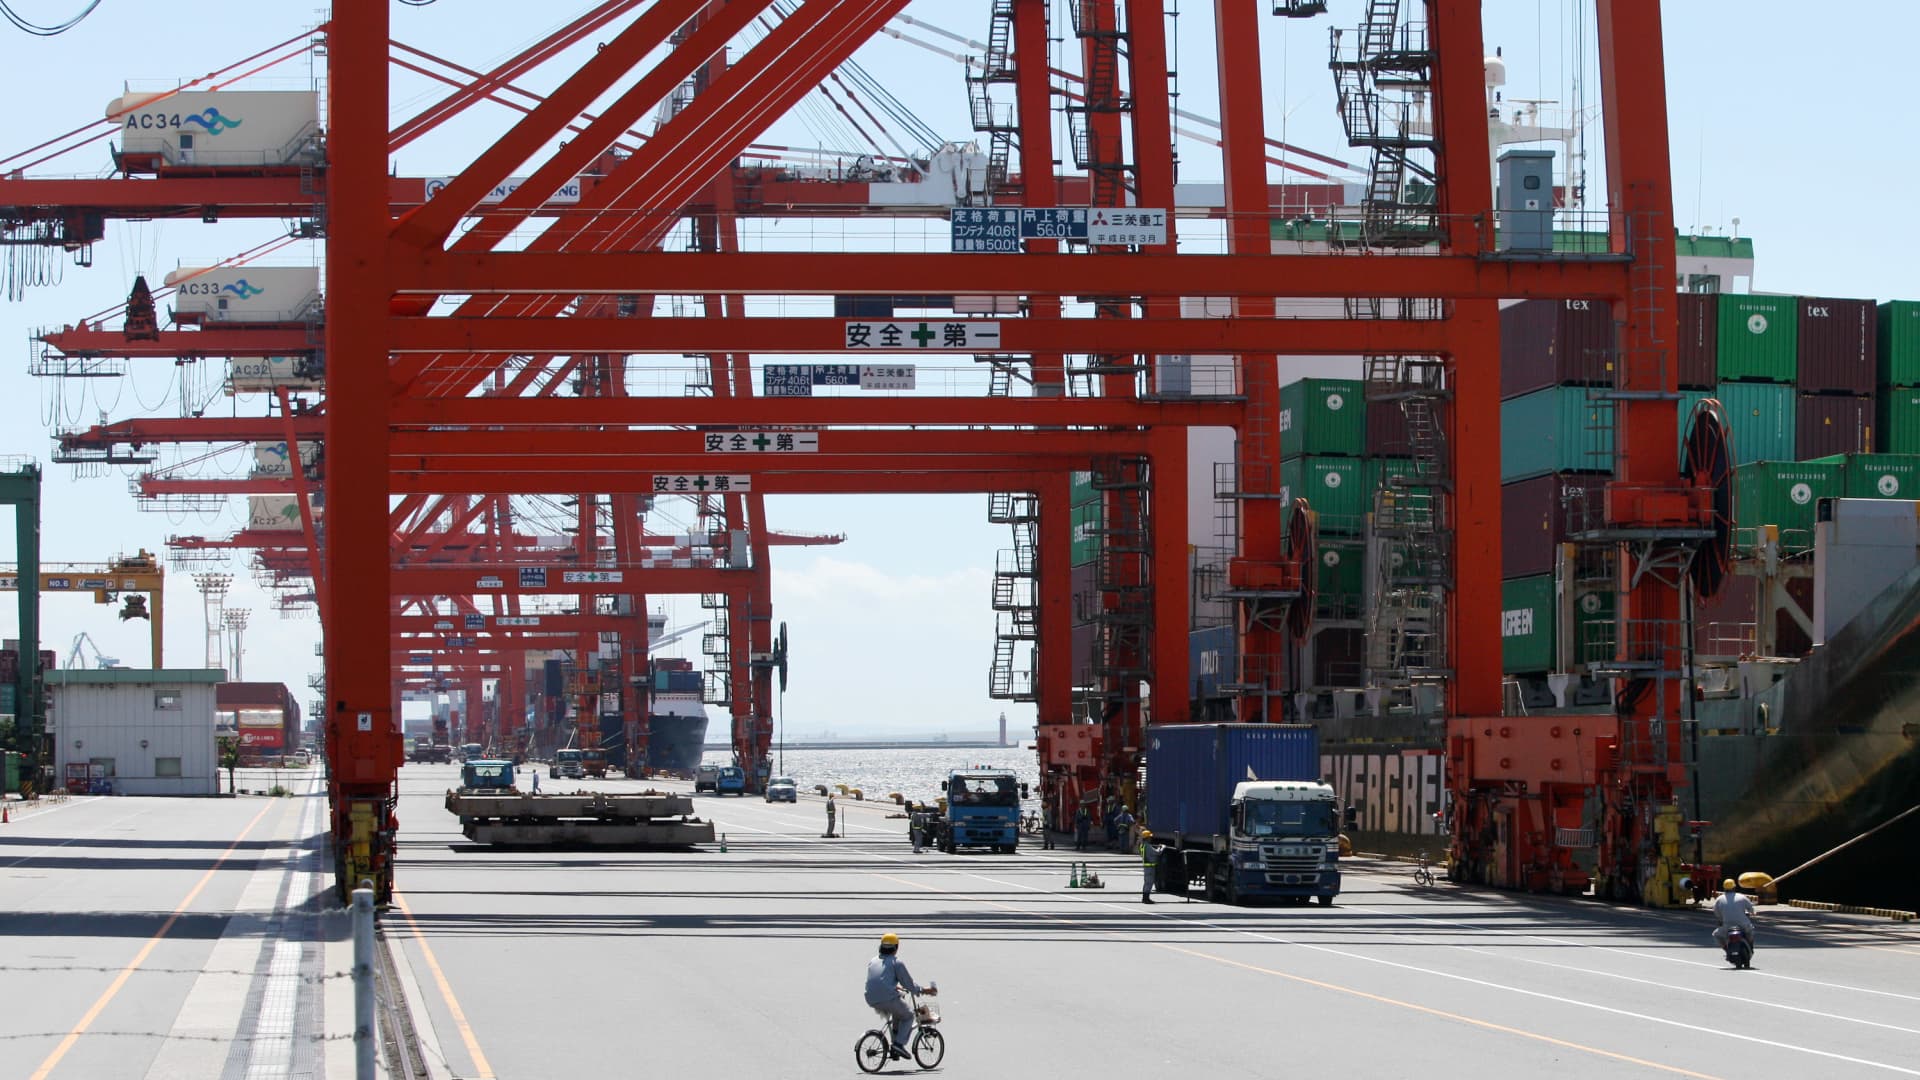 A worker cycles past a ship at a shipping terminal in Tokyo, Japan.